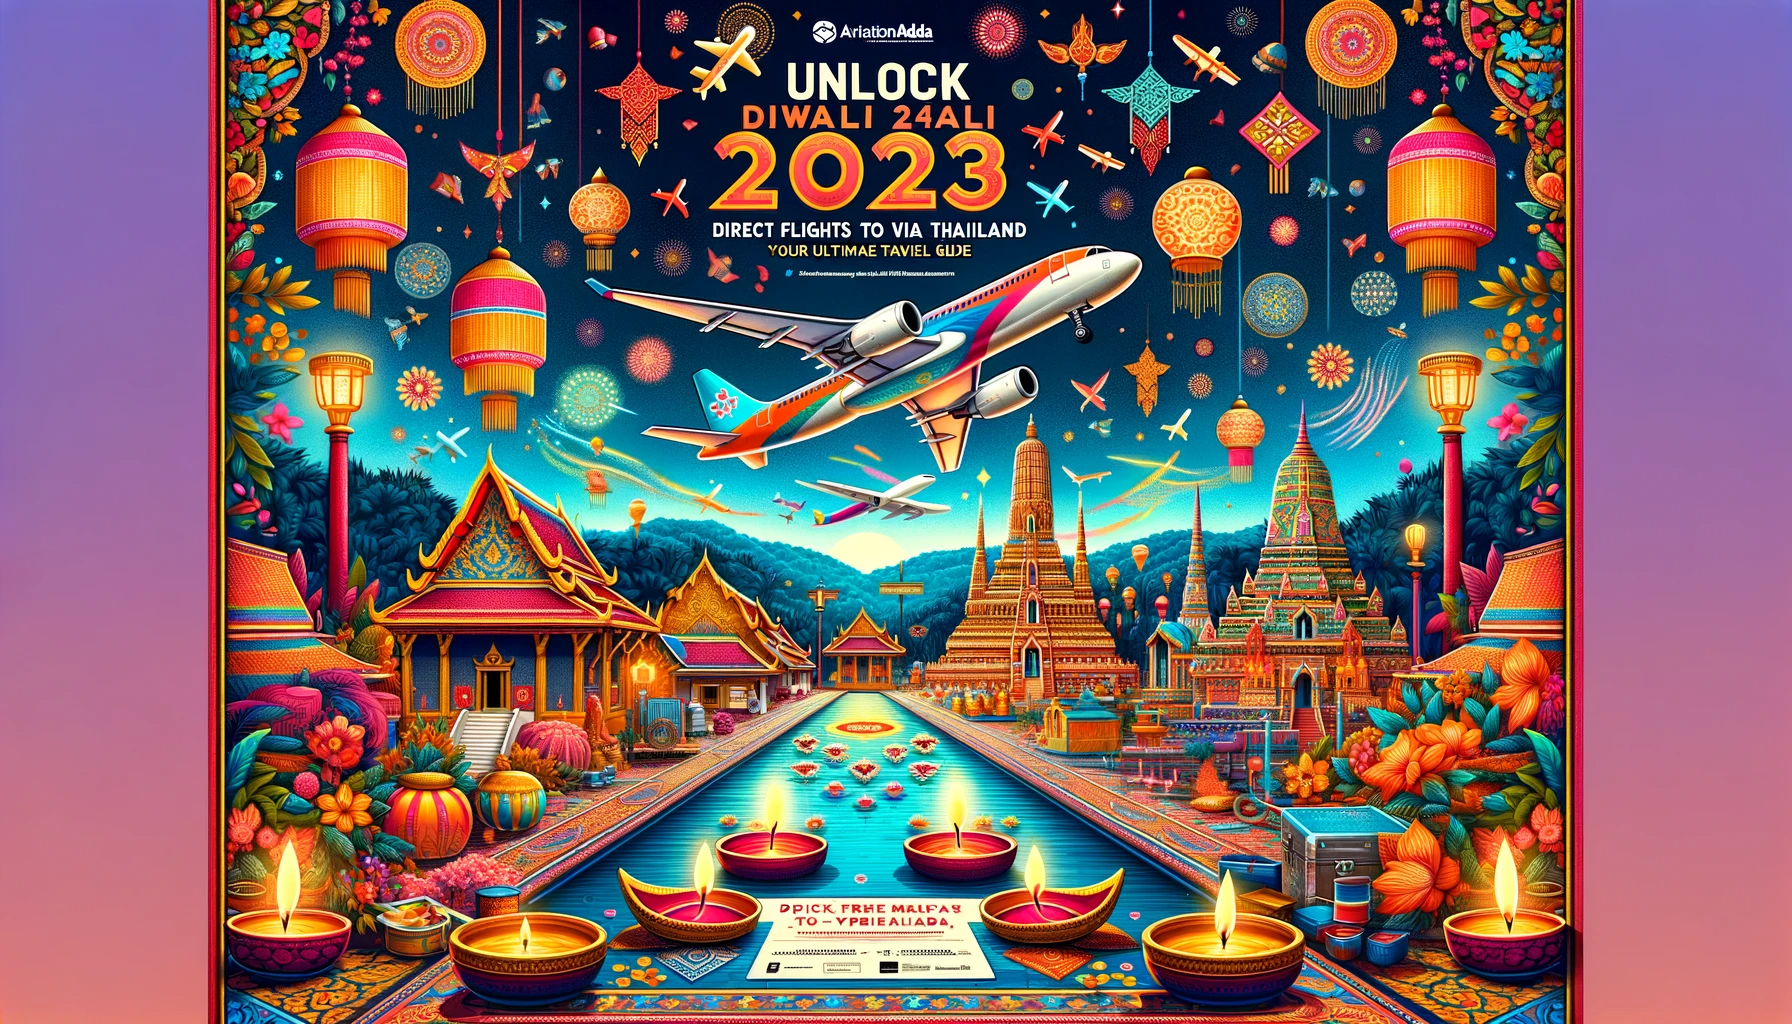 festive-poster-for-Diwali-2023-featuring-a-vibrant-illustration-of-a-plane-flying-over-a-scenic-depiction-of-Thailand